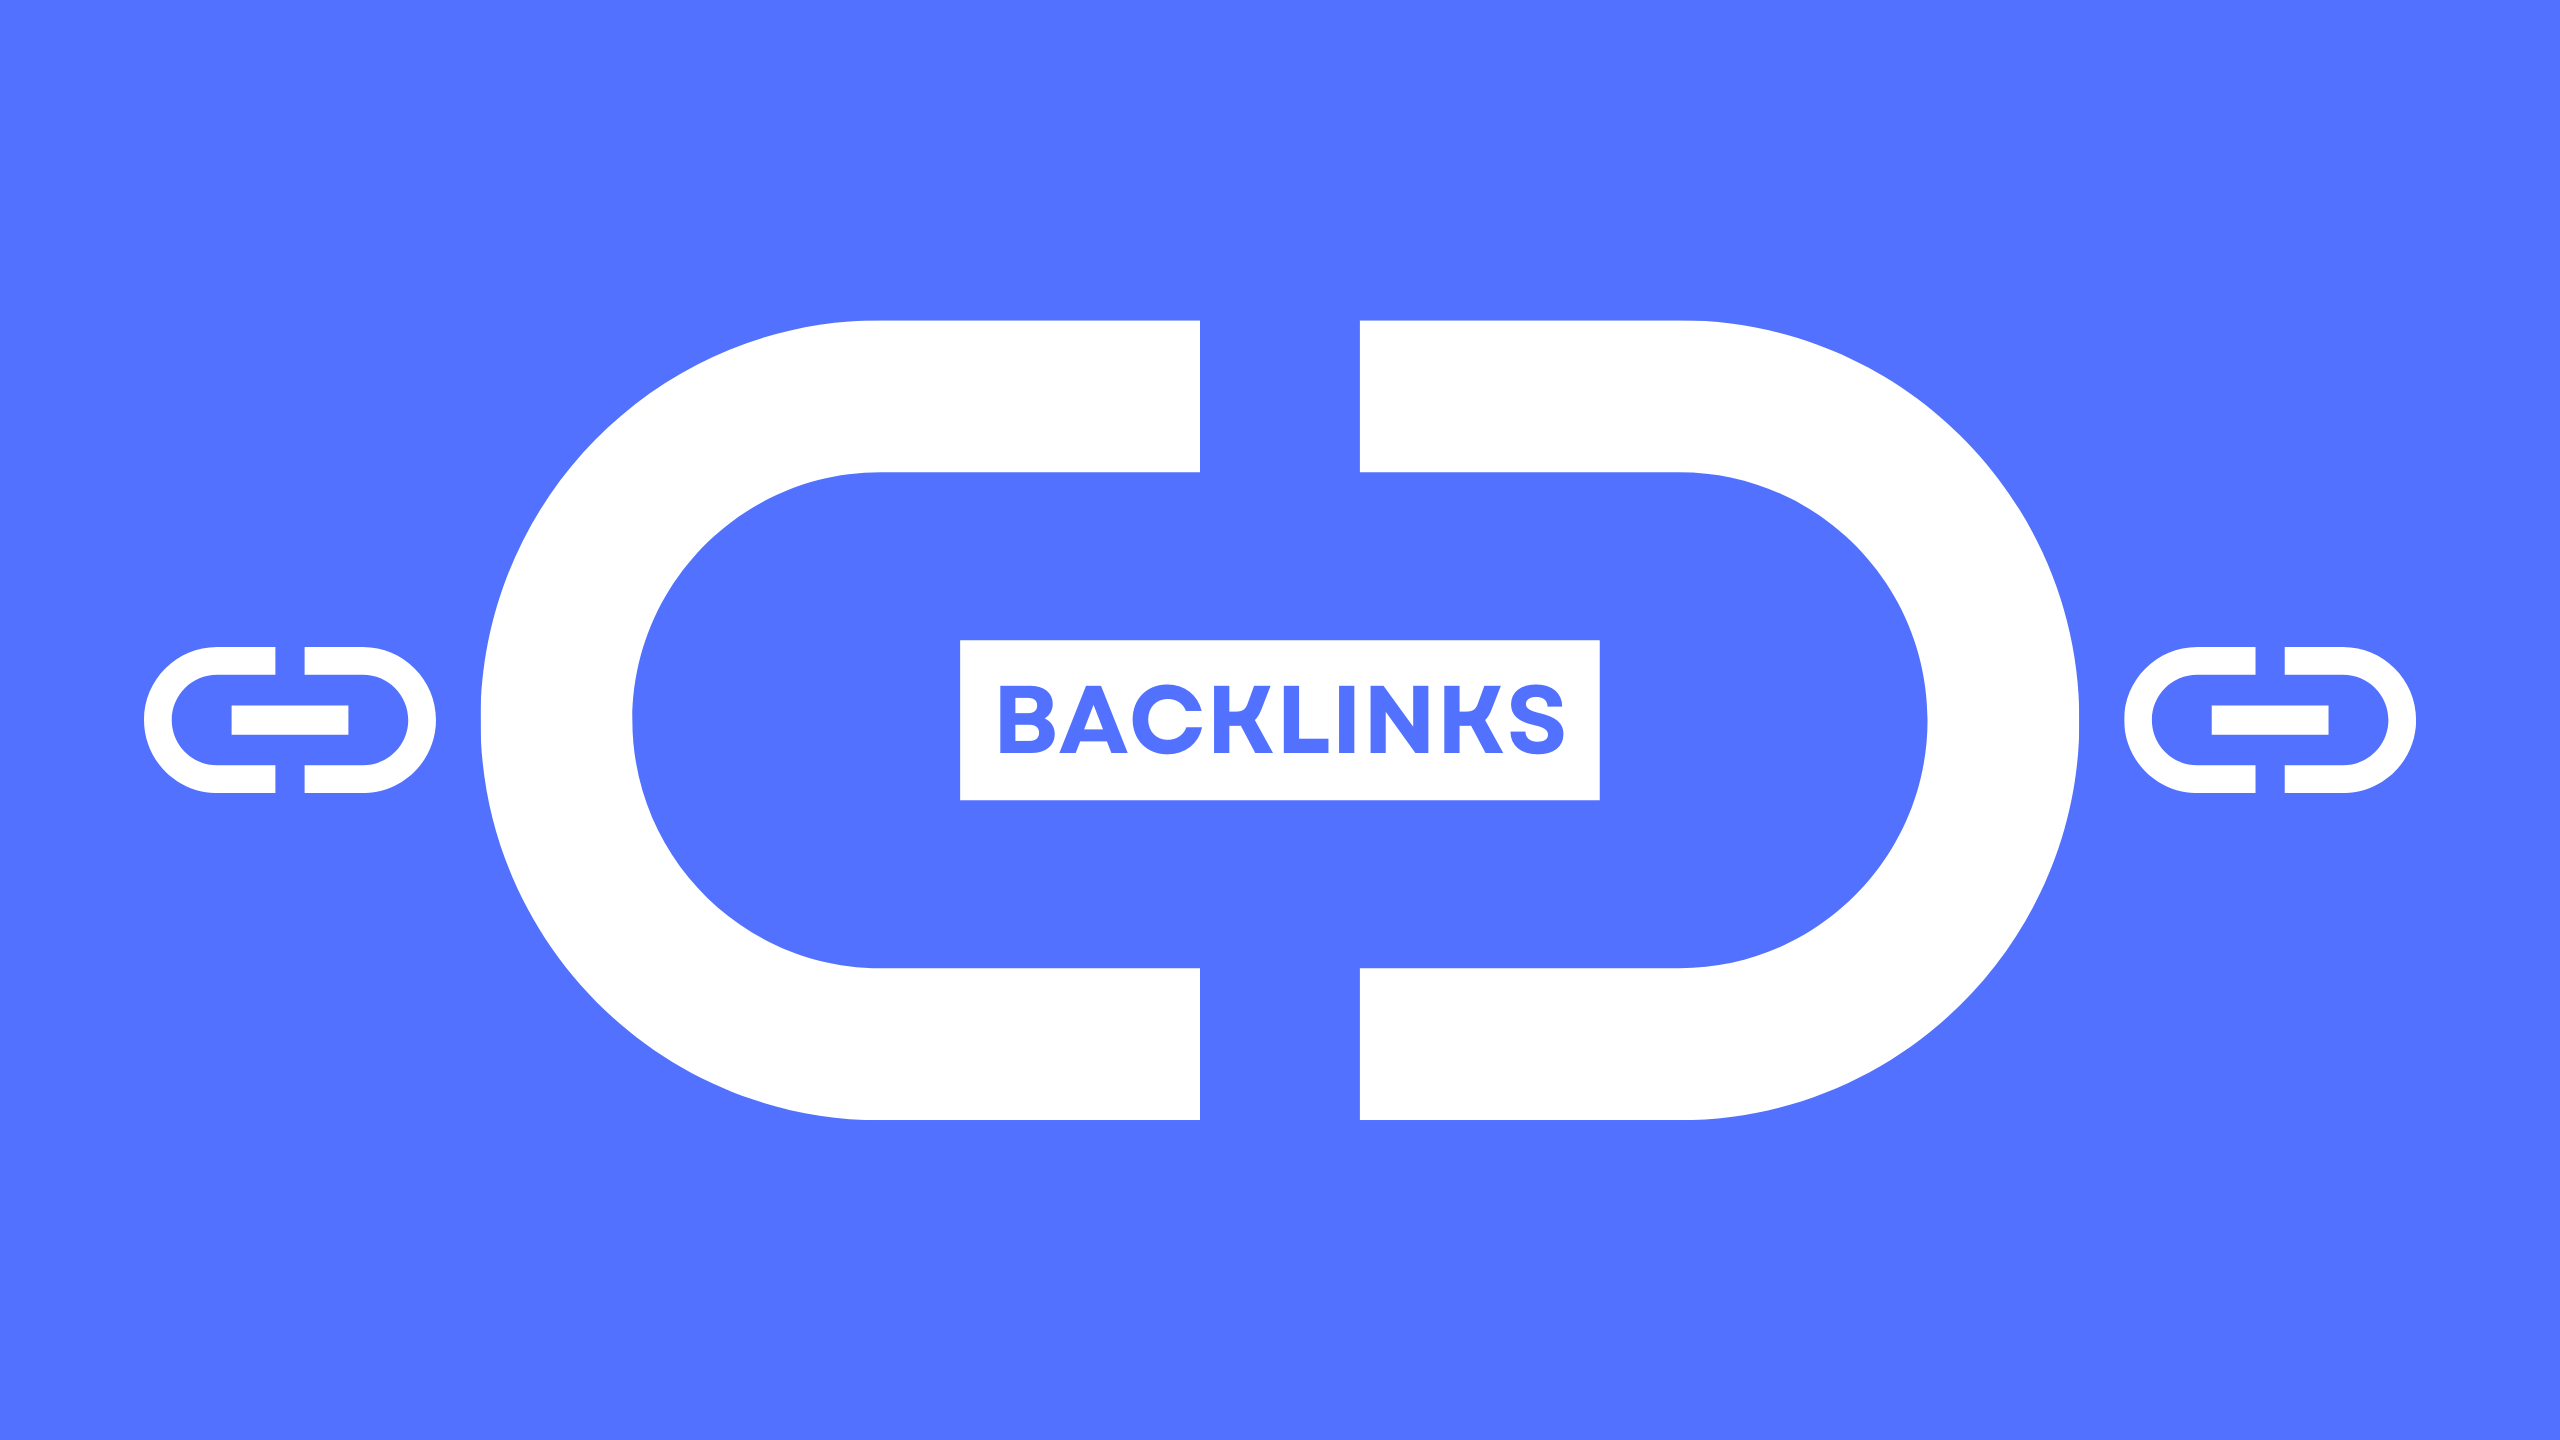 What are backlinks? How to make backlinks?